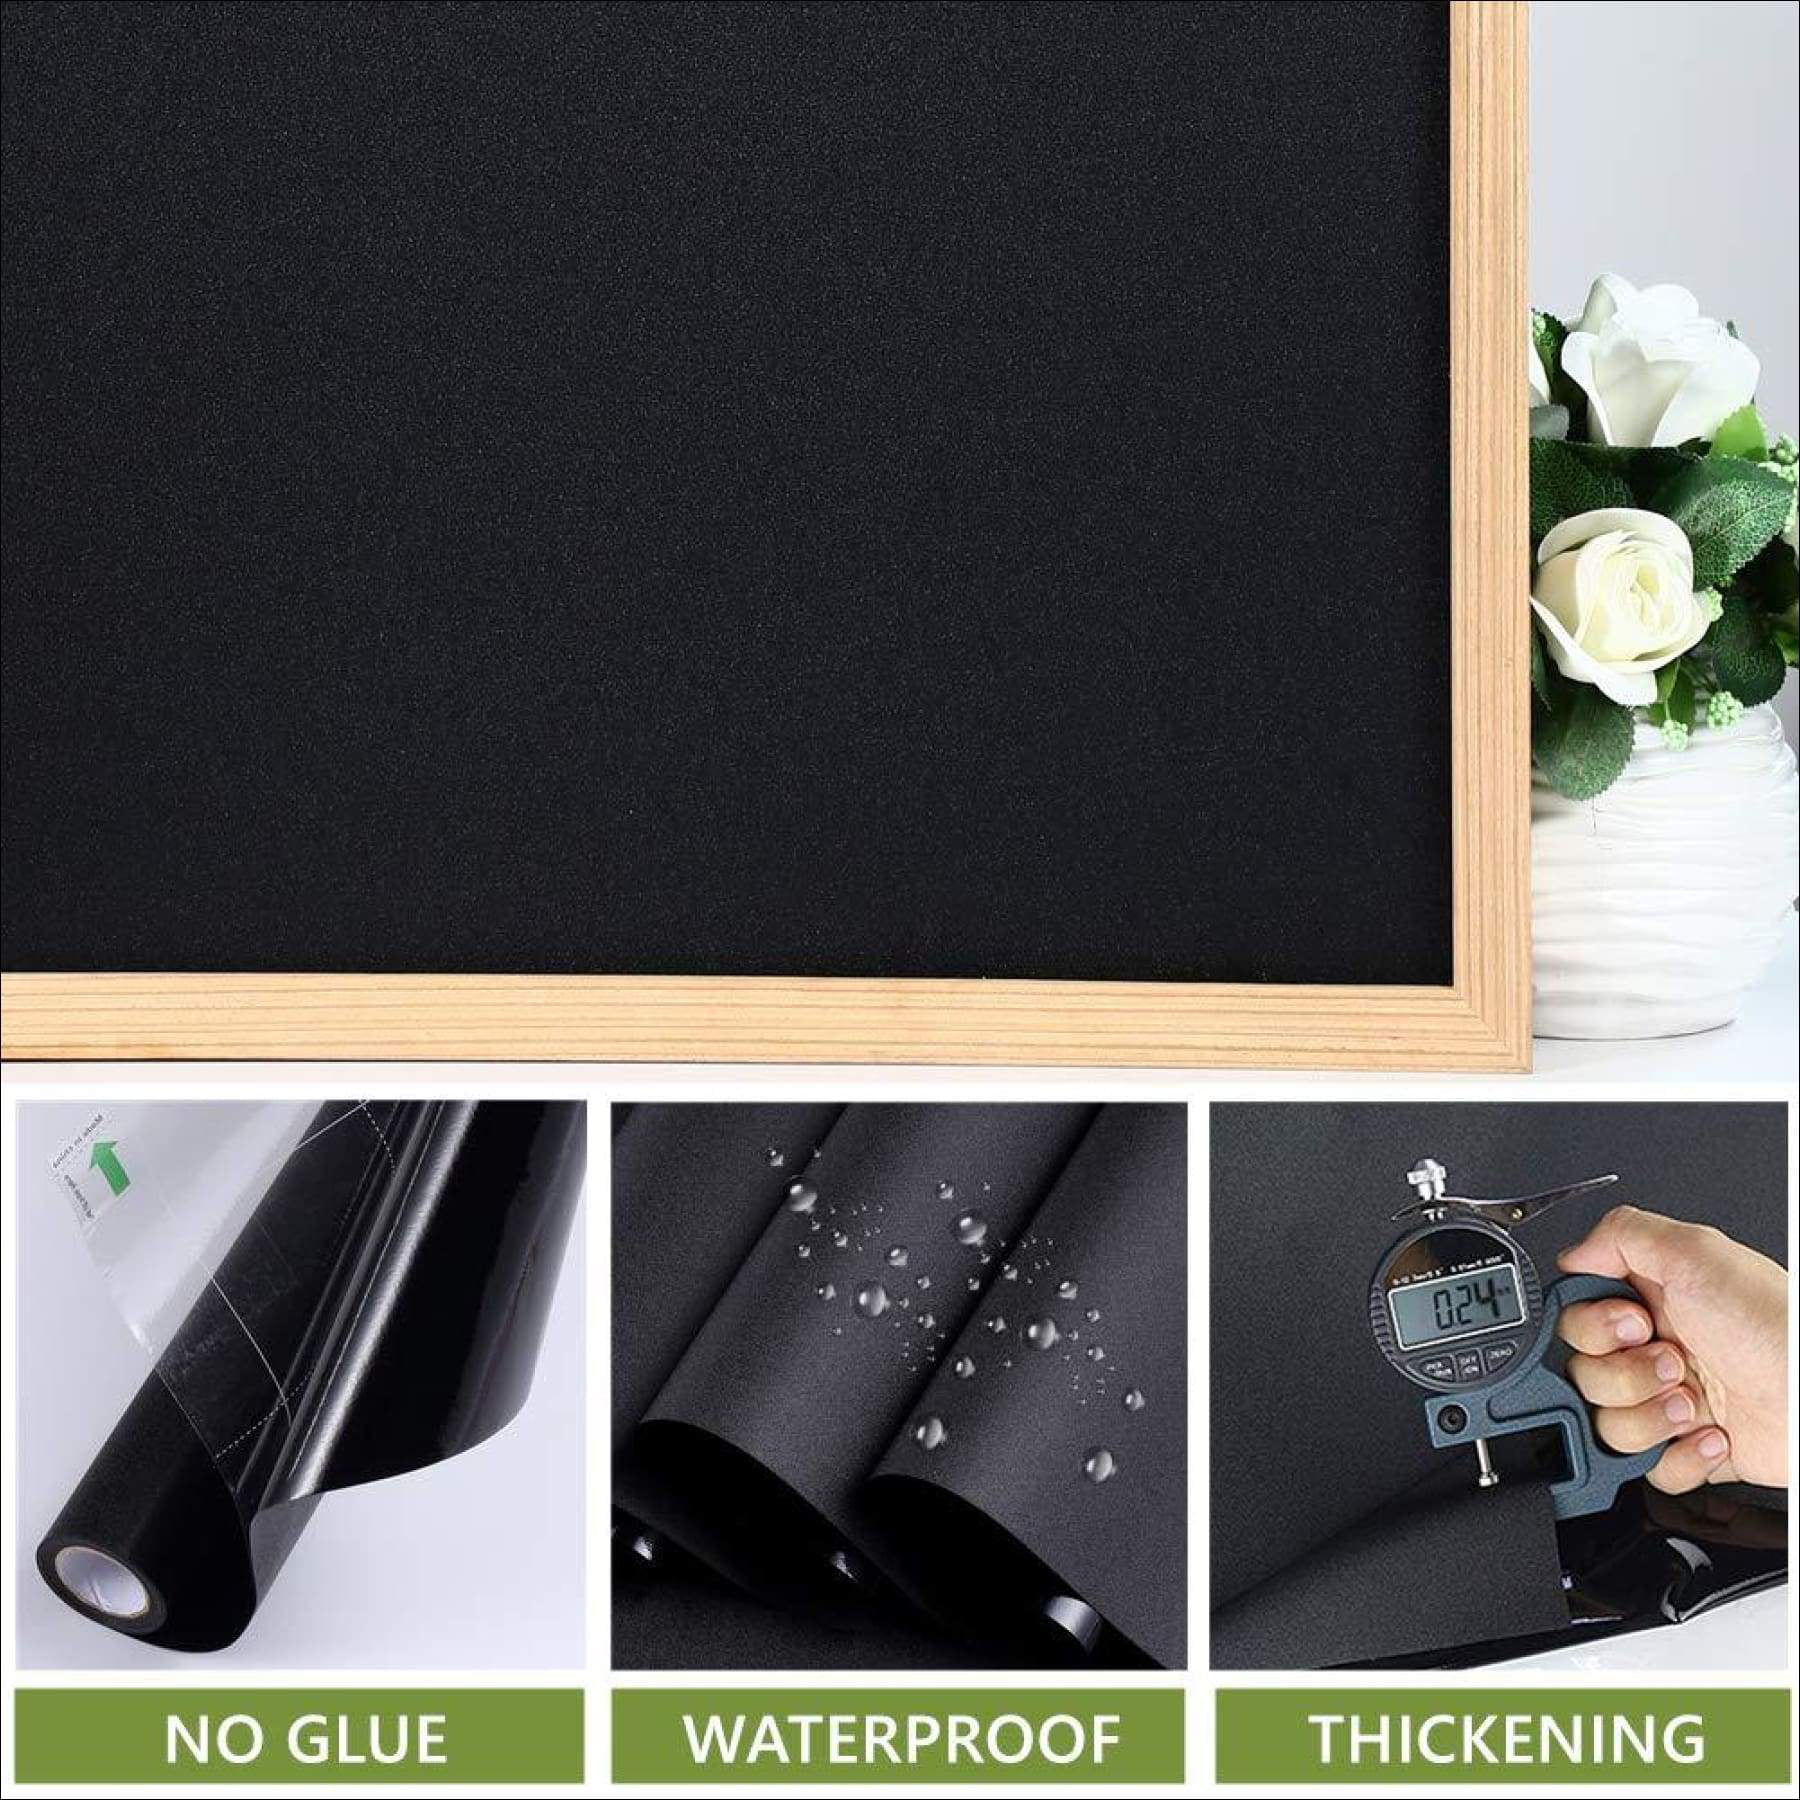 17.7 x 78.7 inches VELIMAX Static Cling Total Blackout Window Film Privacy Room Darkening Window Tint Black Window Cover 100% Light Blocking No Glue